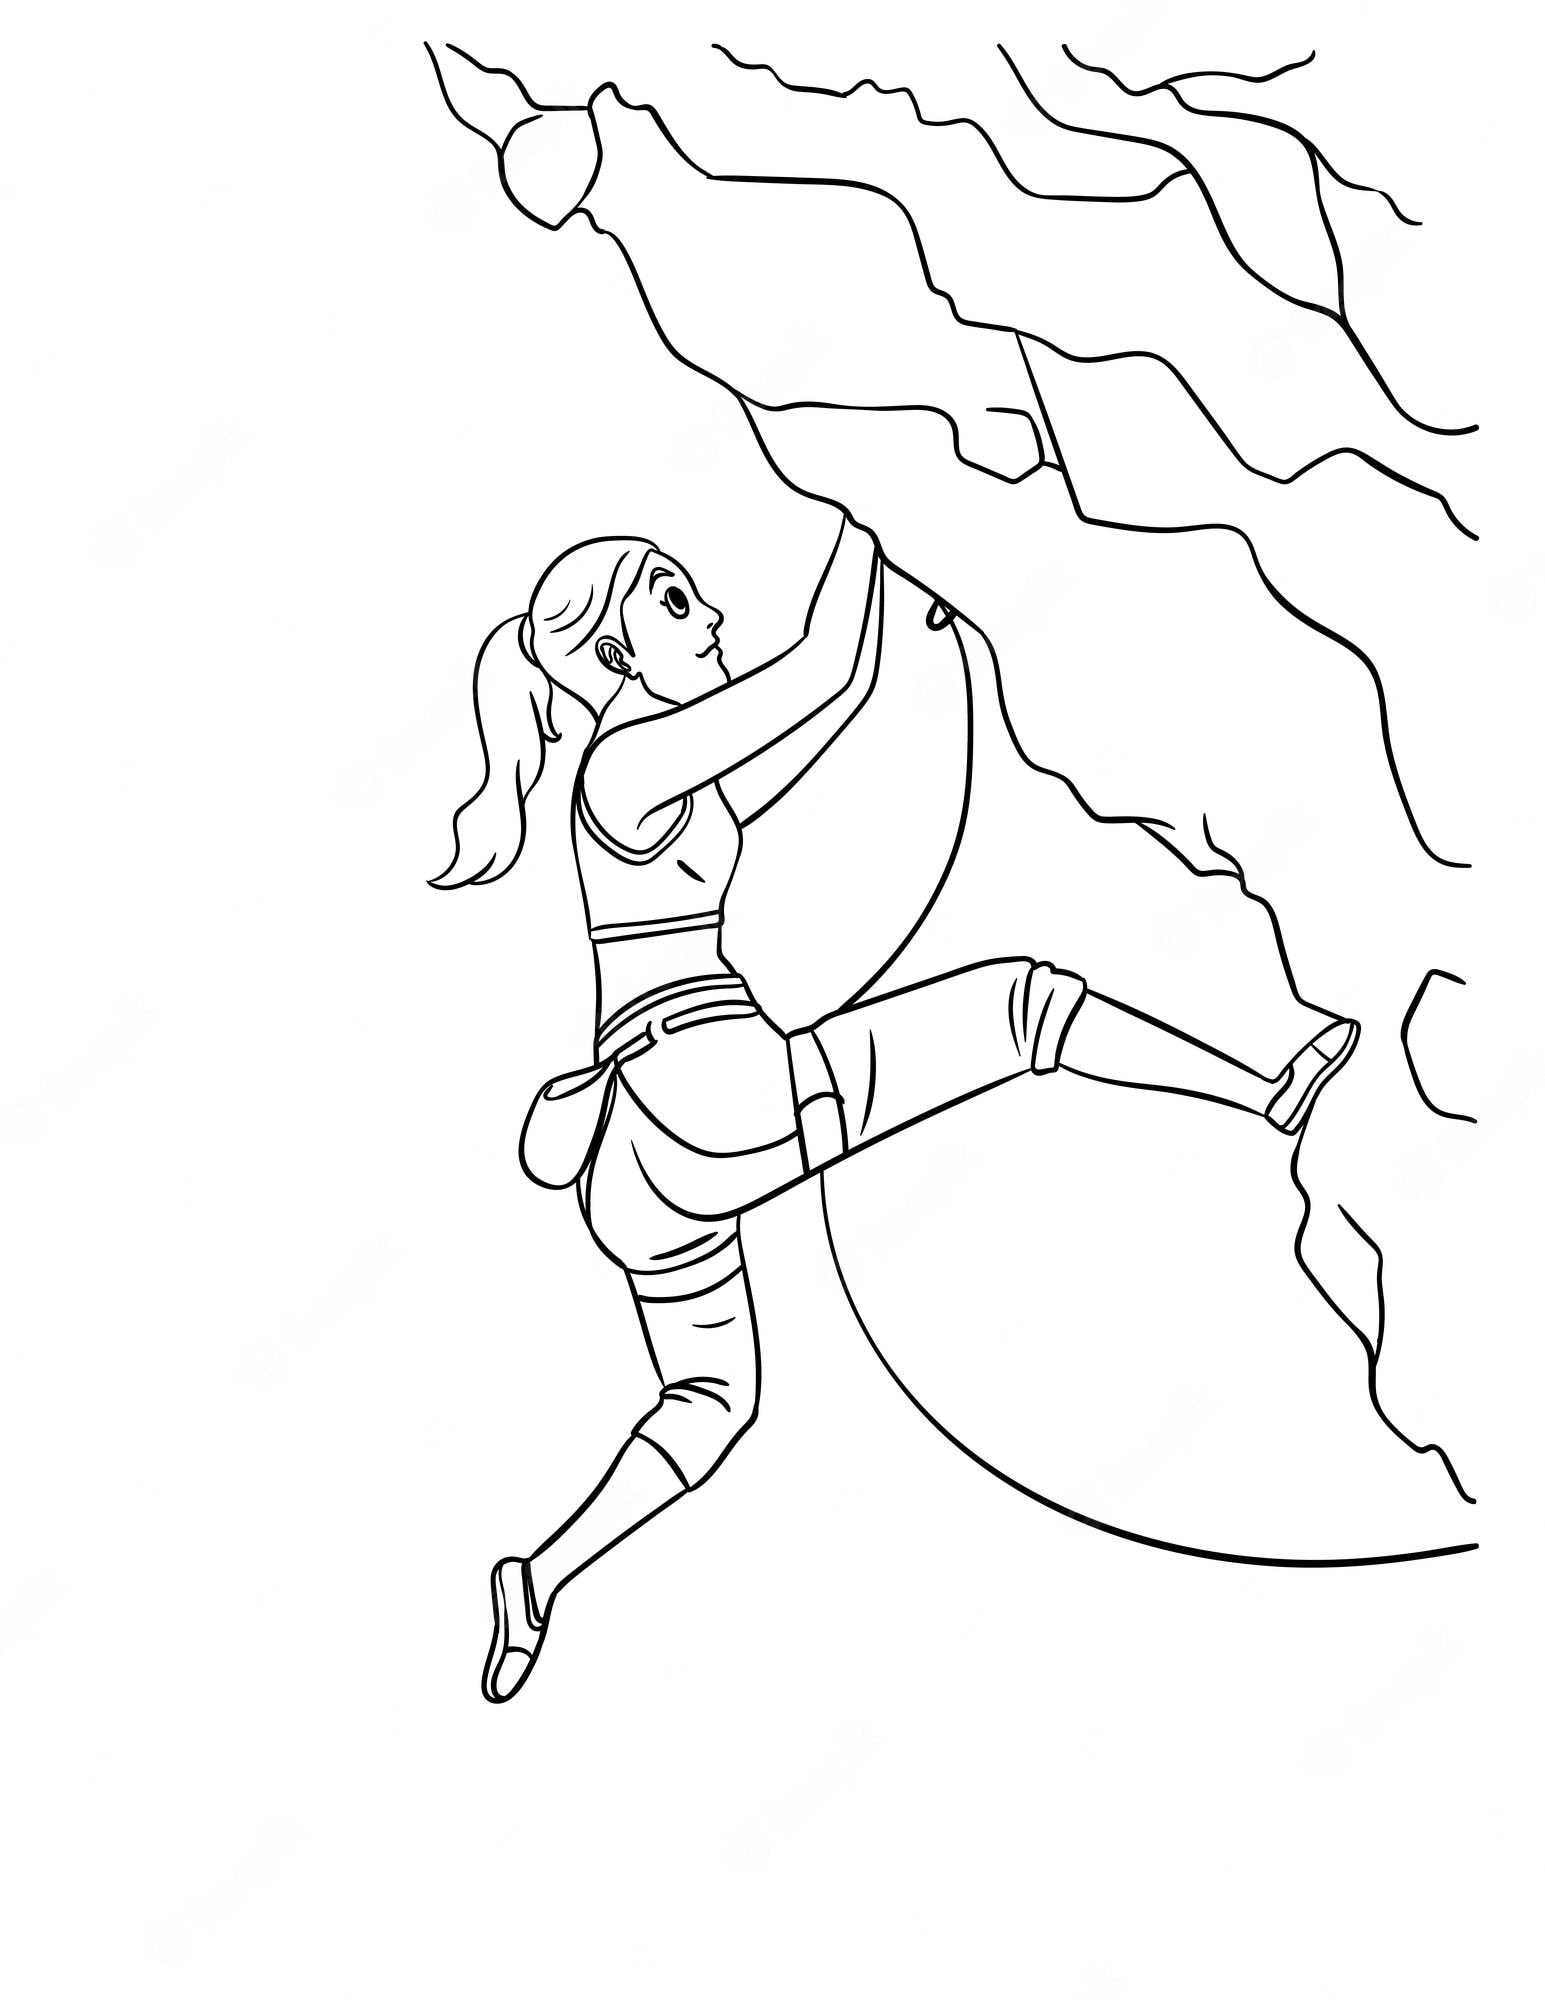 Premium Vector | Rock climbing isolated coloring page for kids